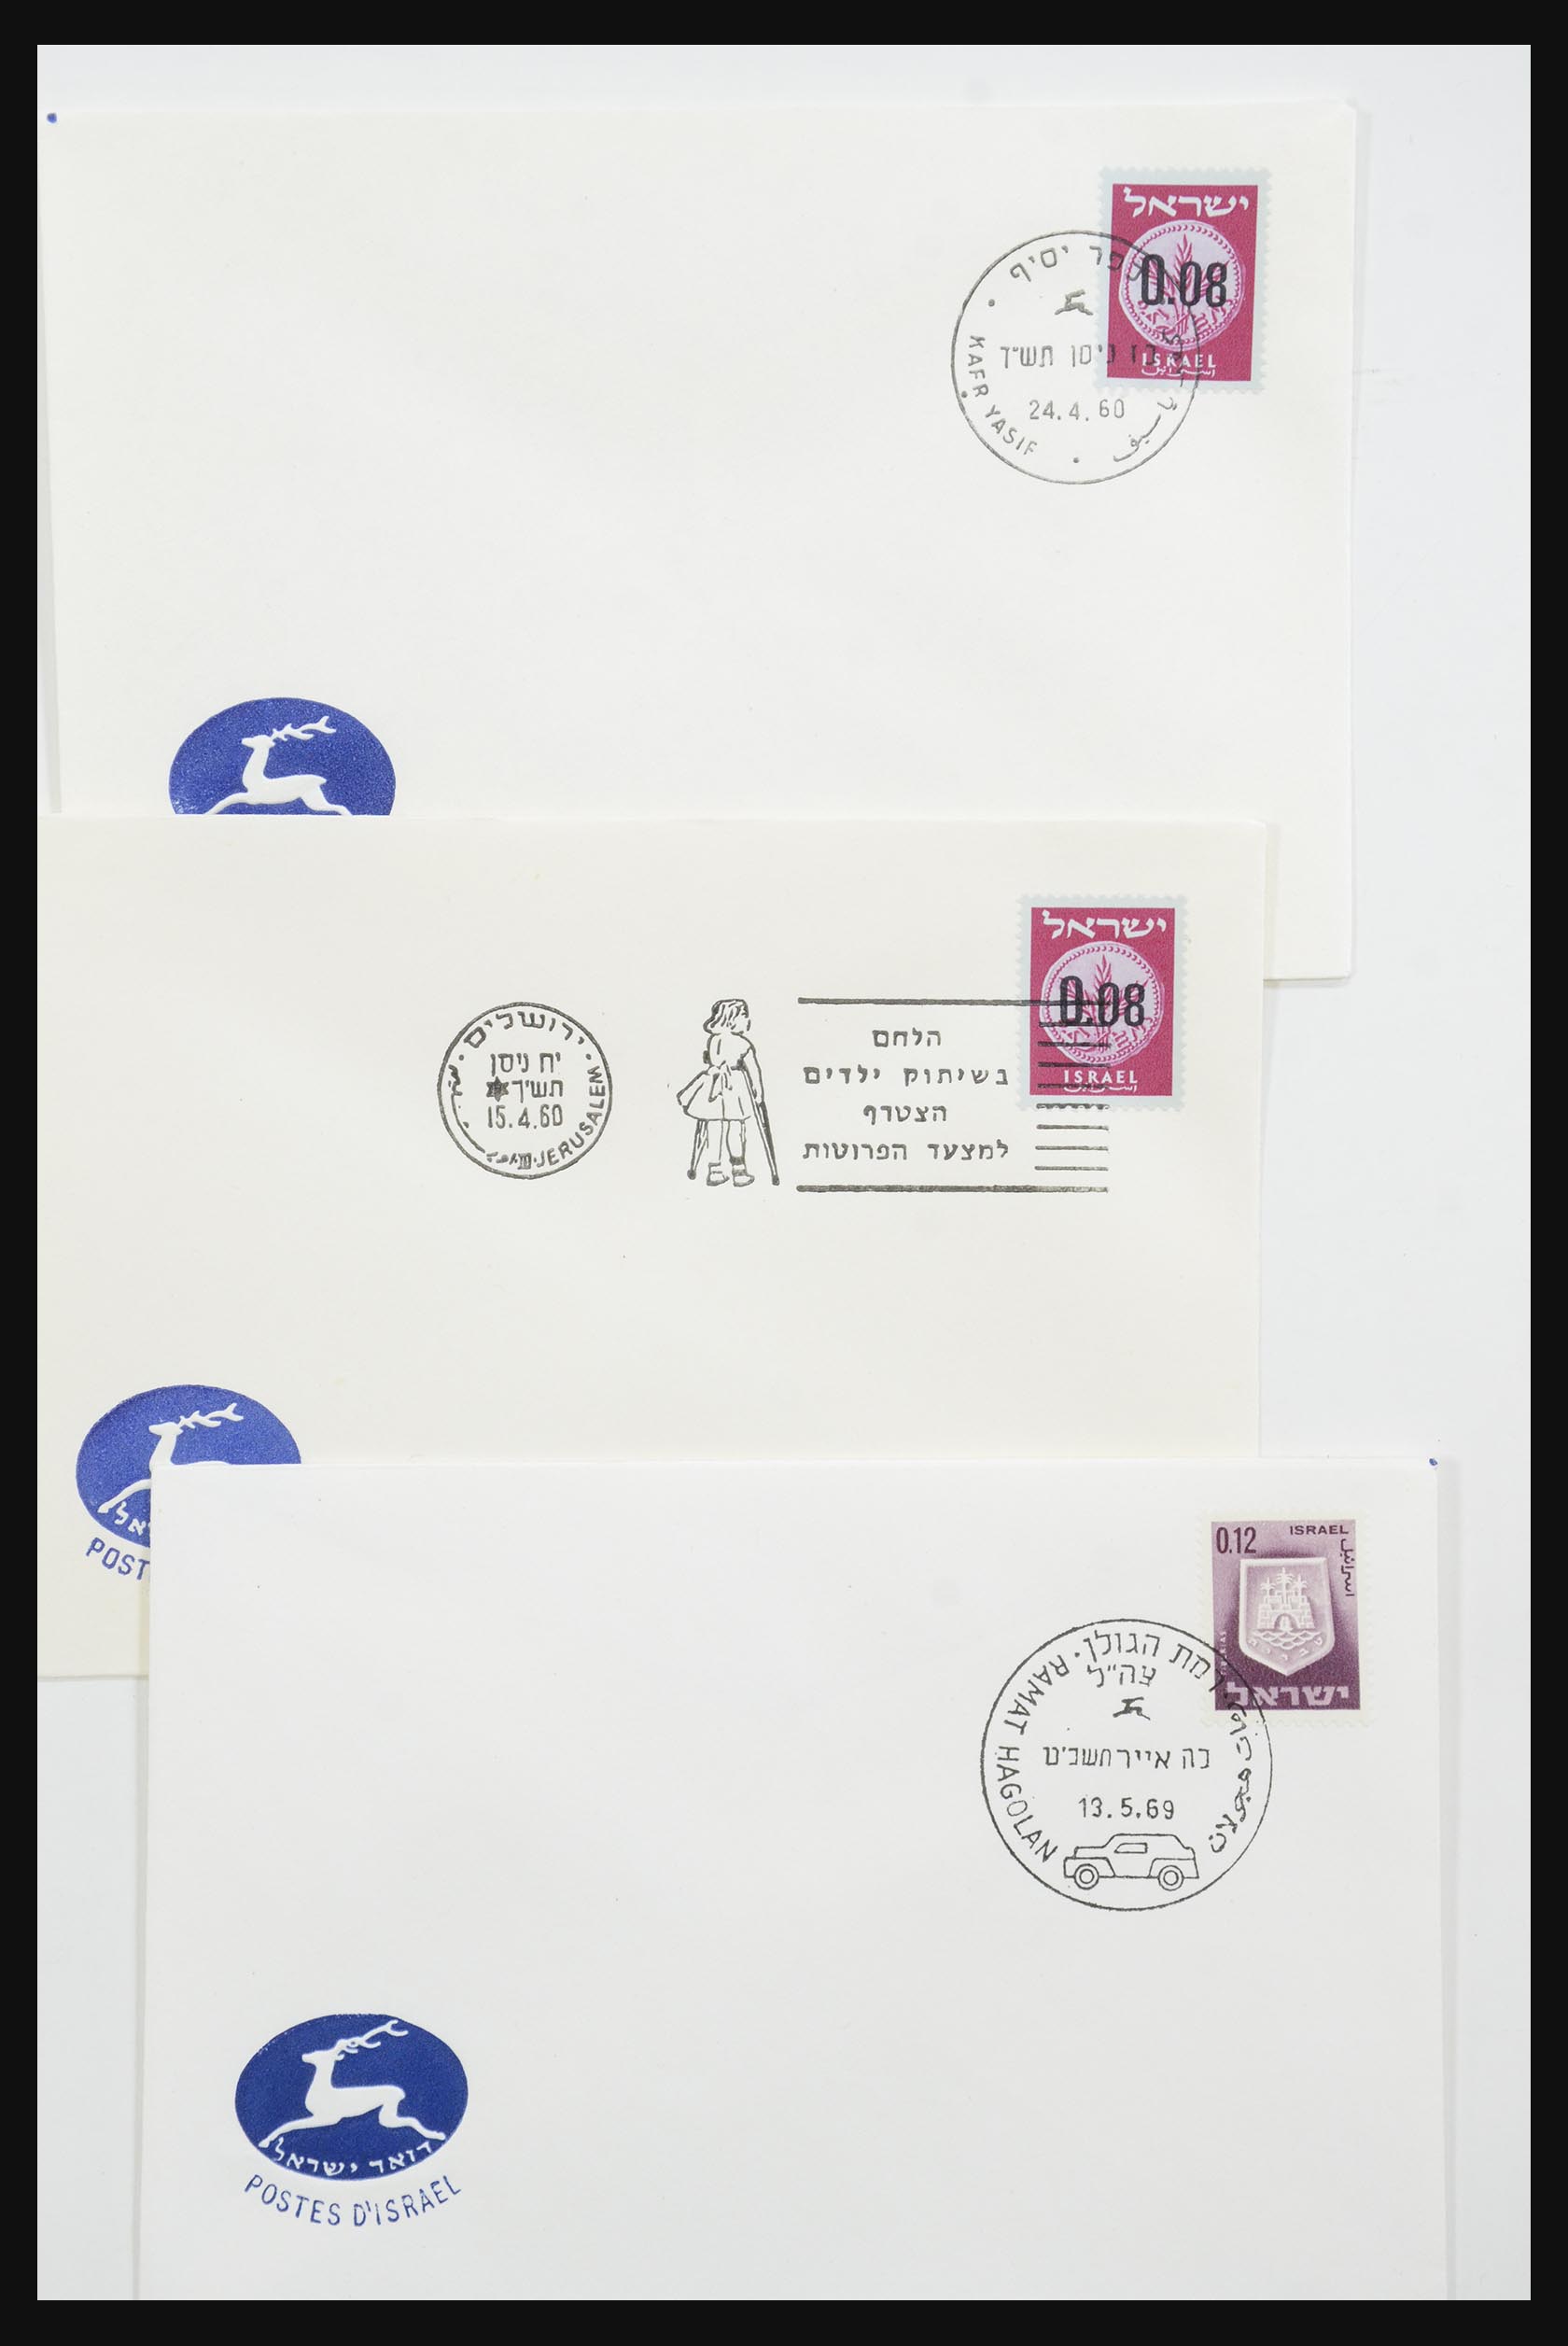 31924 059 - 31924 Israël fdc-collectie 1957-2003.